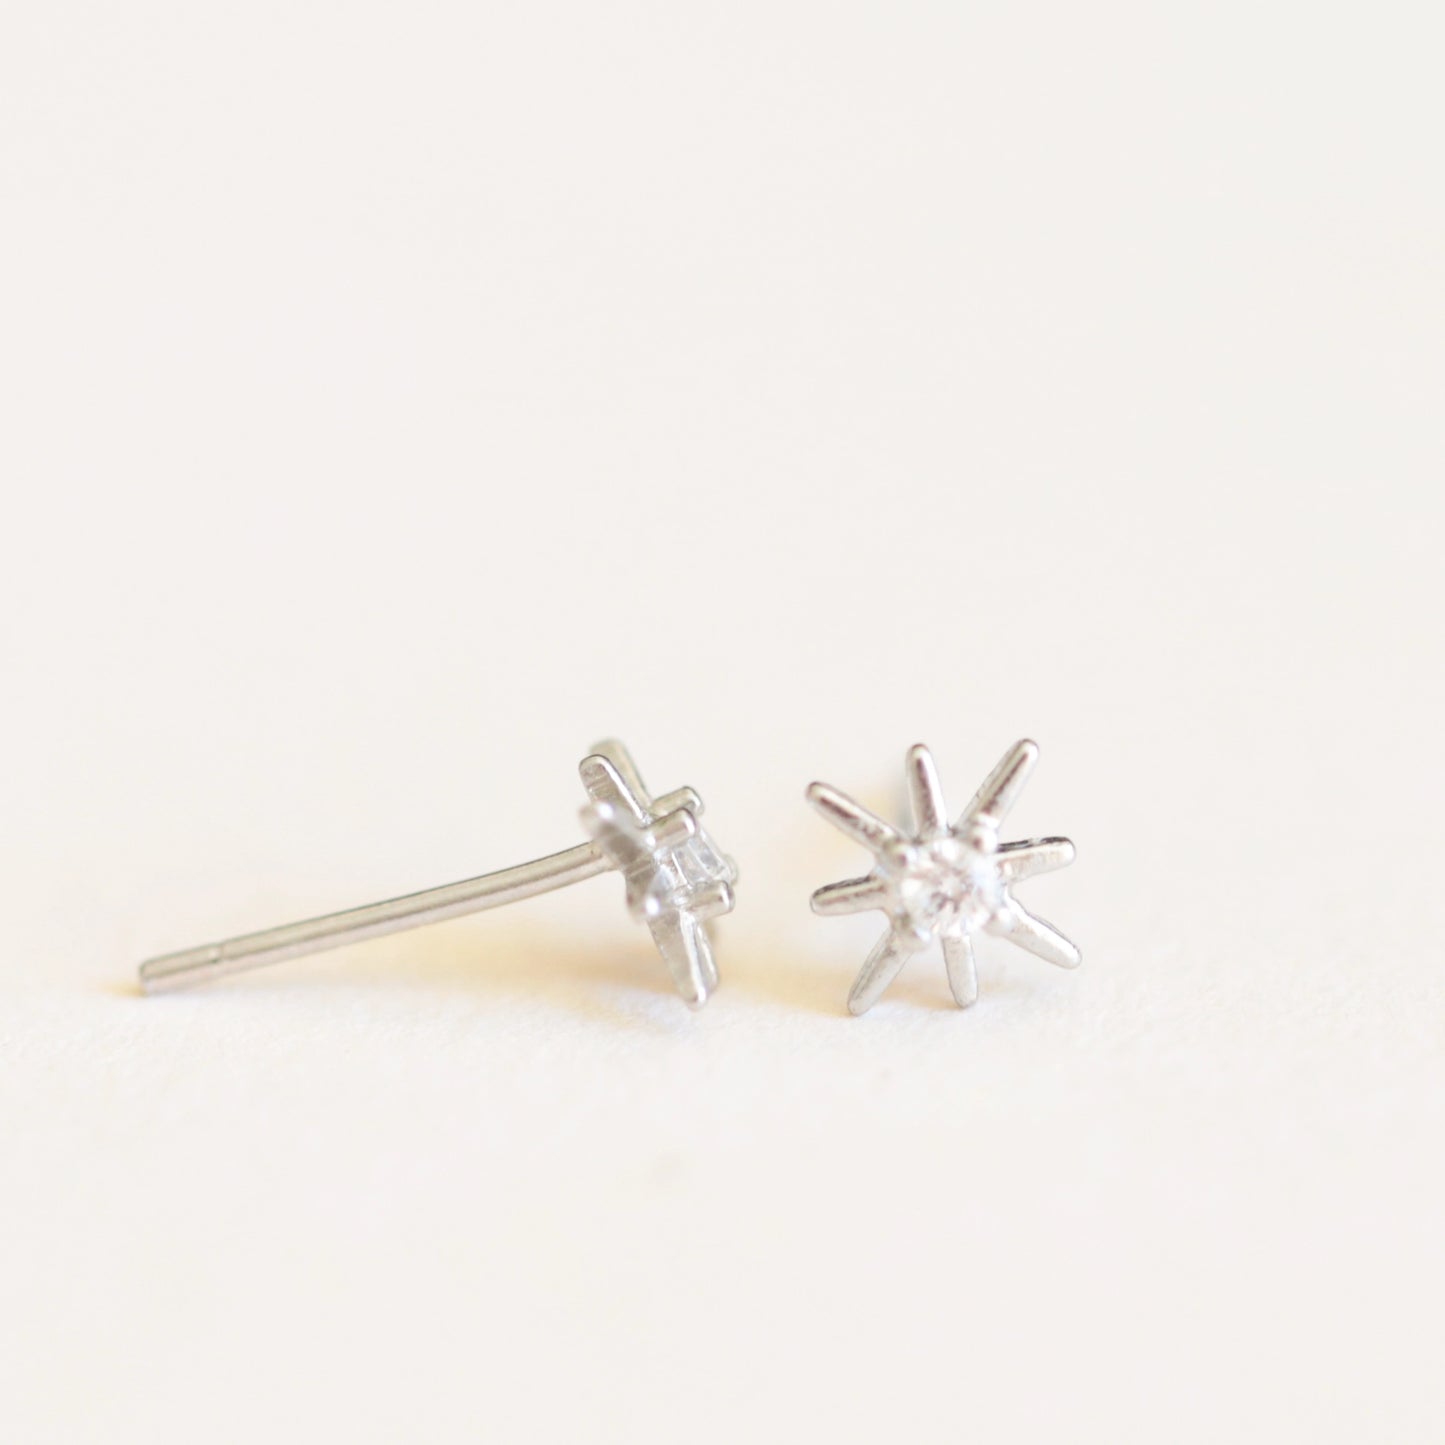 On an ivory background is a pair of dainty silver star earrings with a CZ stone in the center.